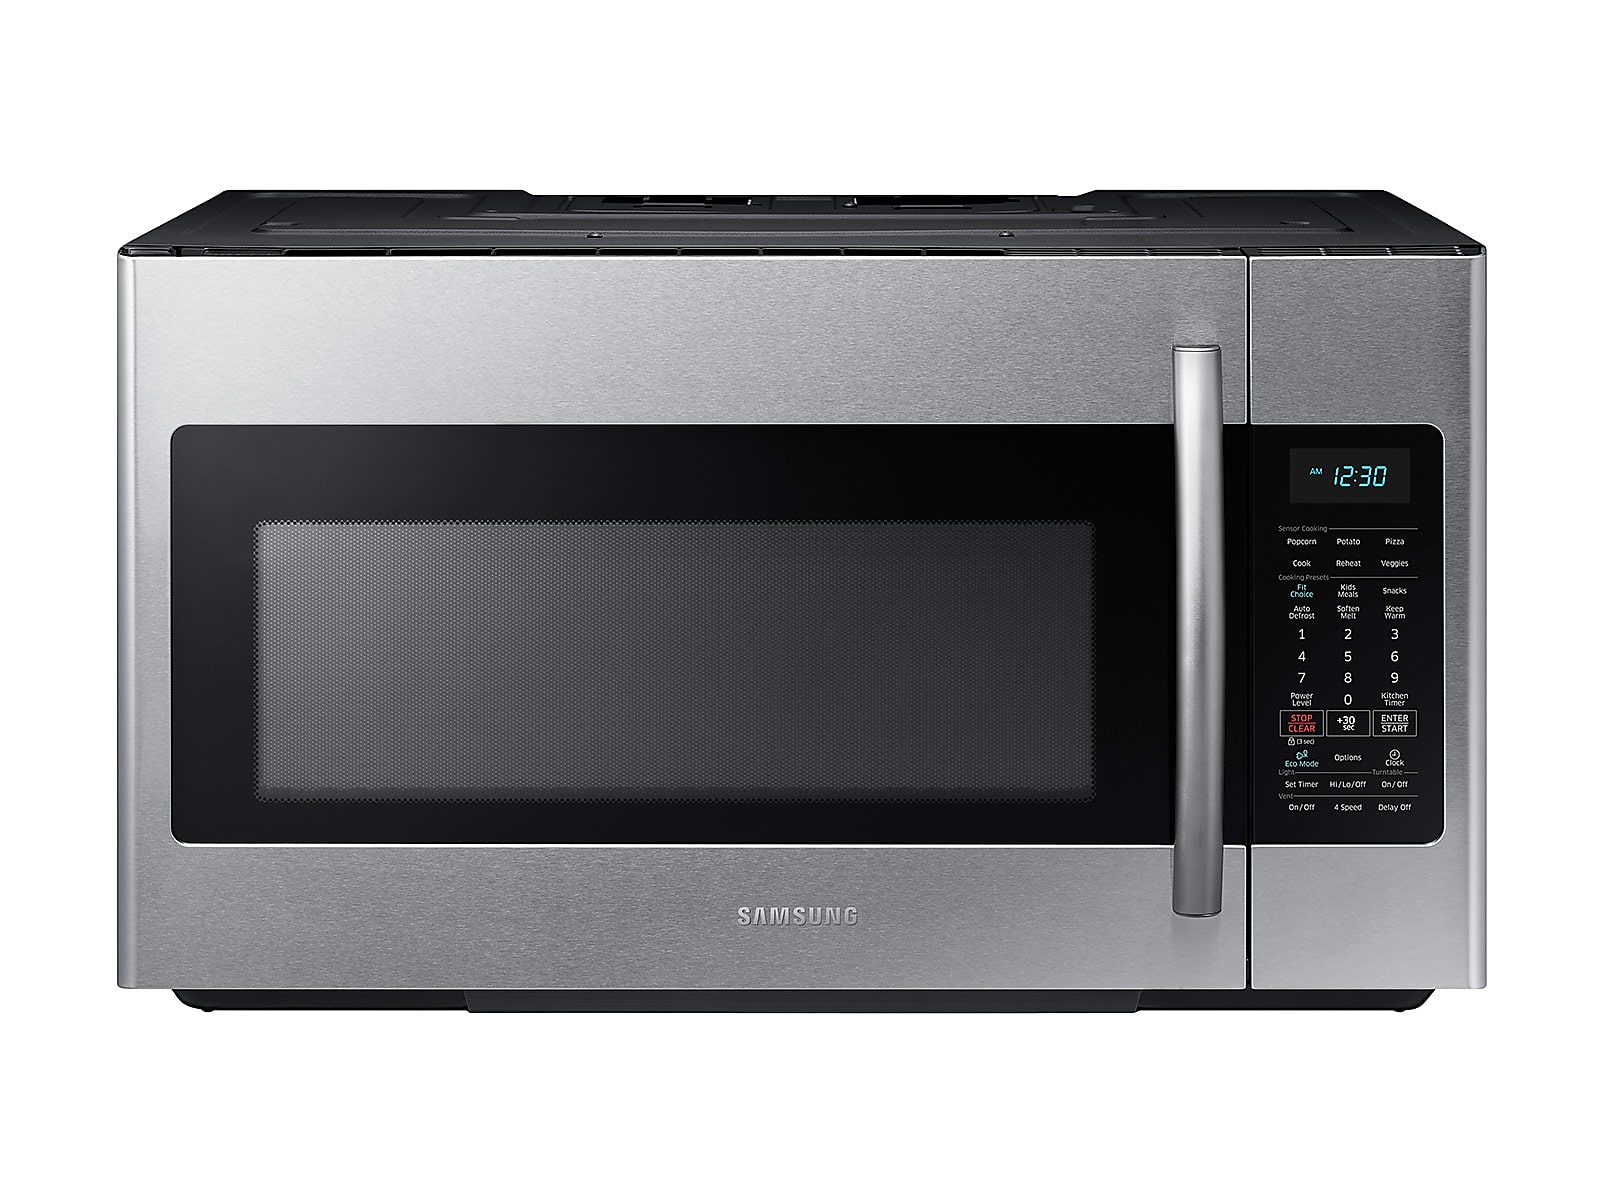 Samsung 1.8 cu. ft. Over-the-Range Microwave with Sensor Cooking in Silver(ME18H704SFS/AA) photo